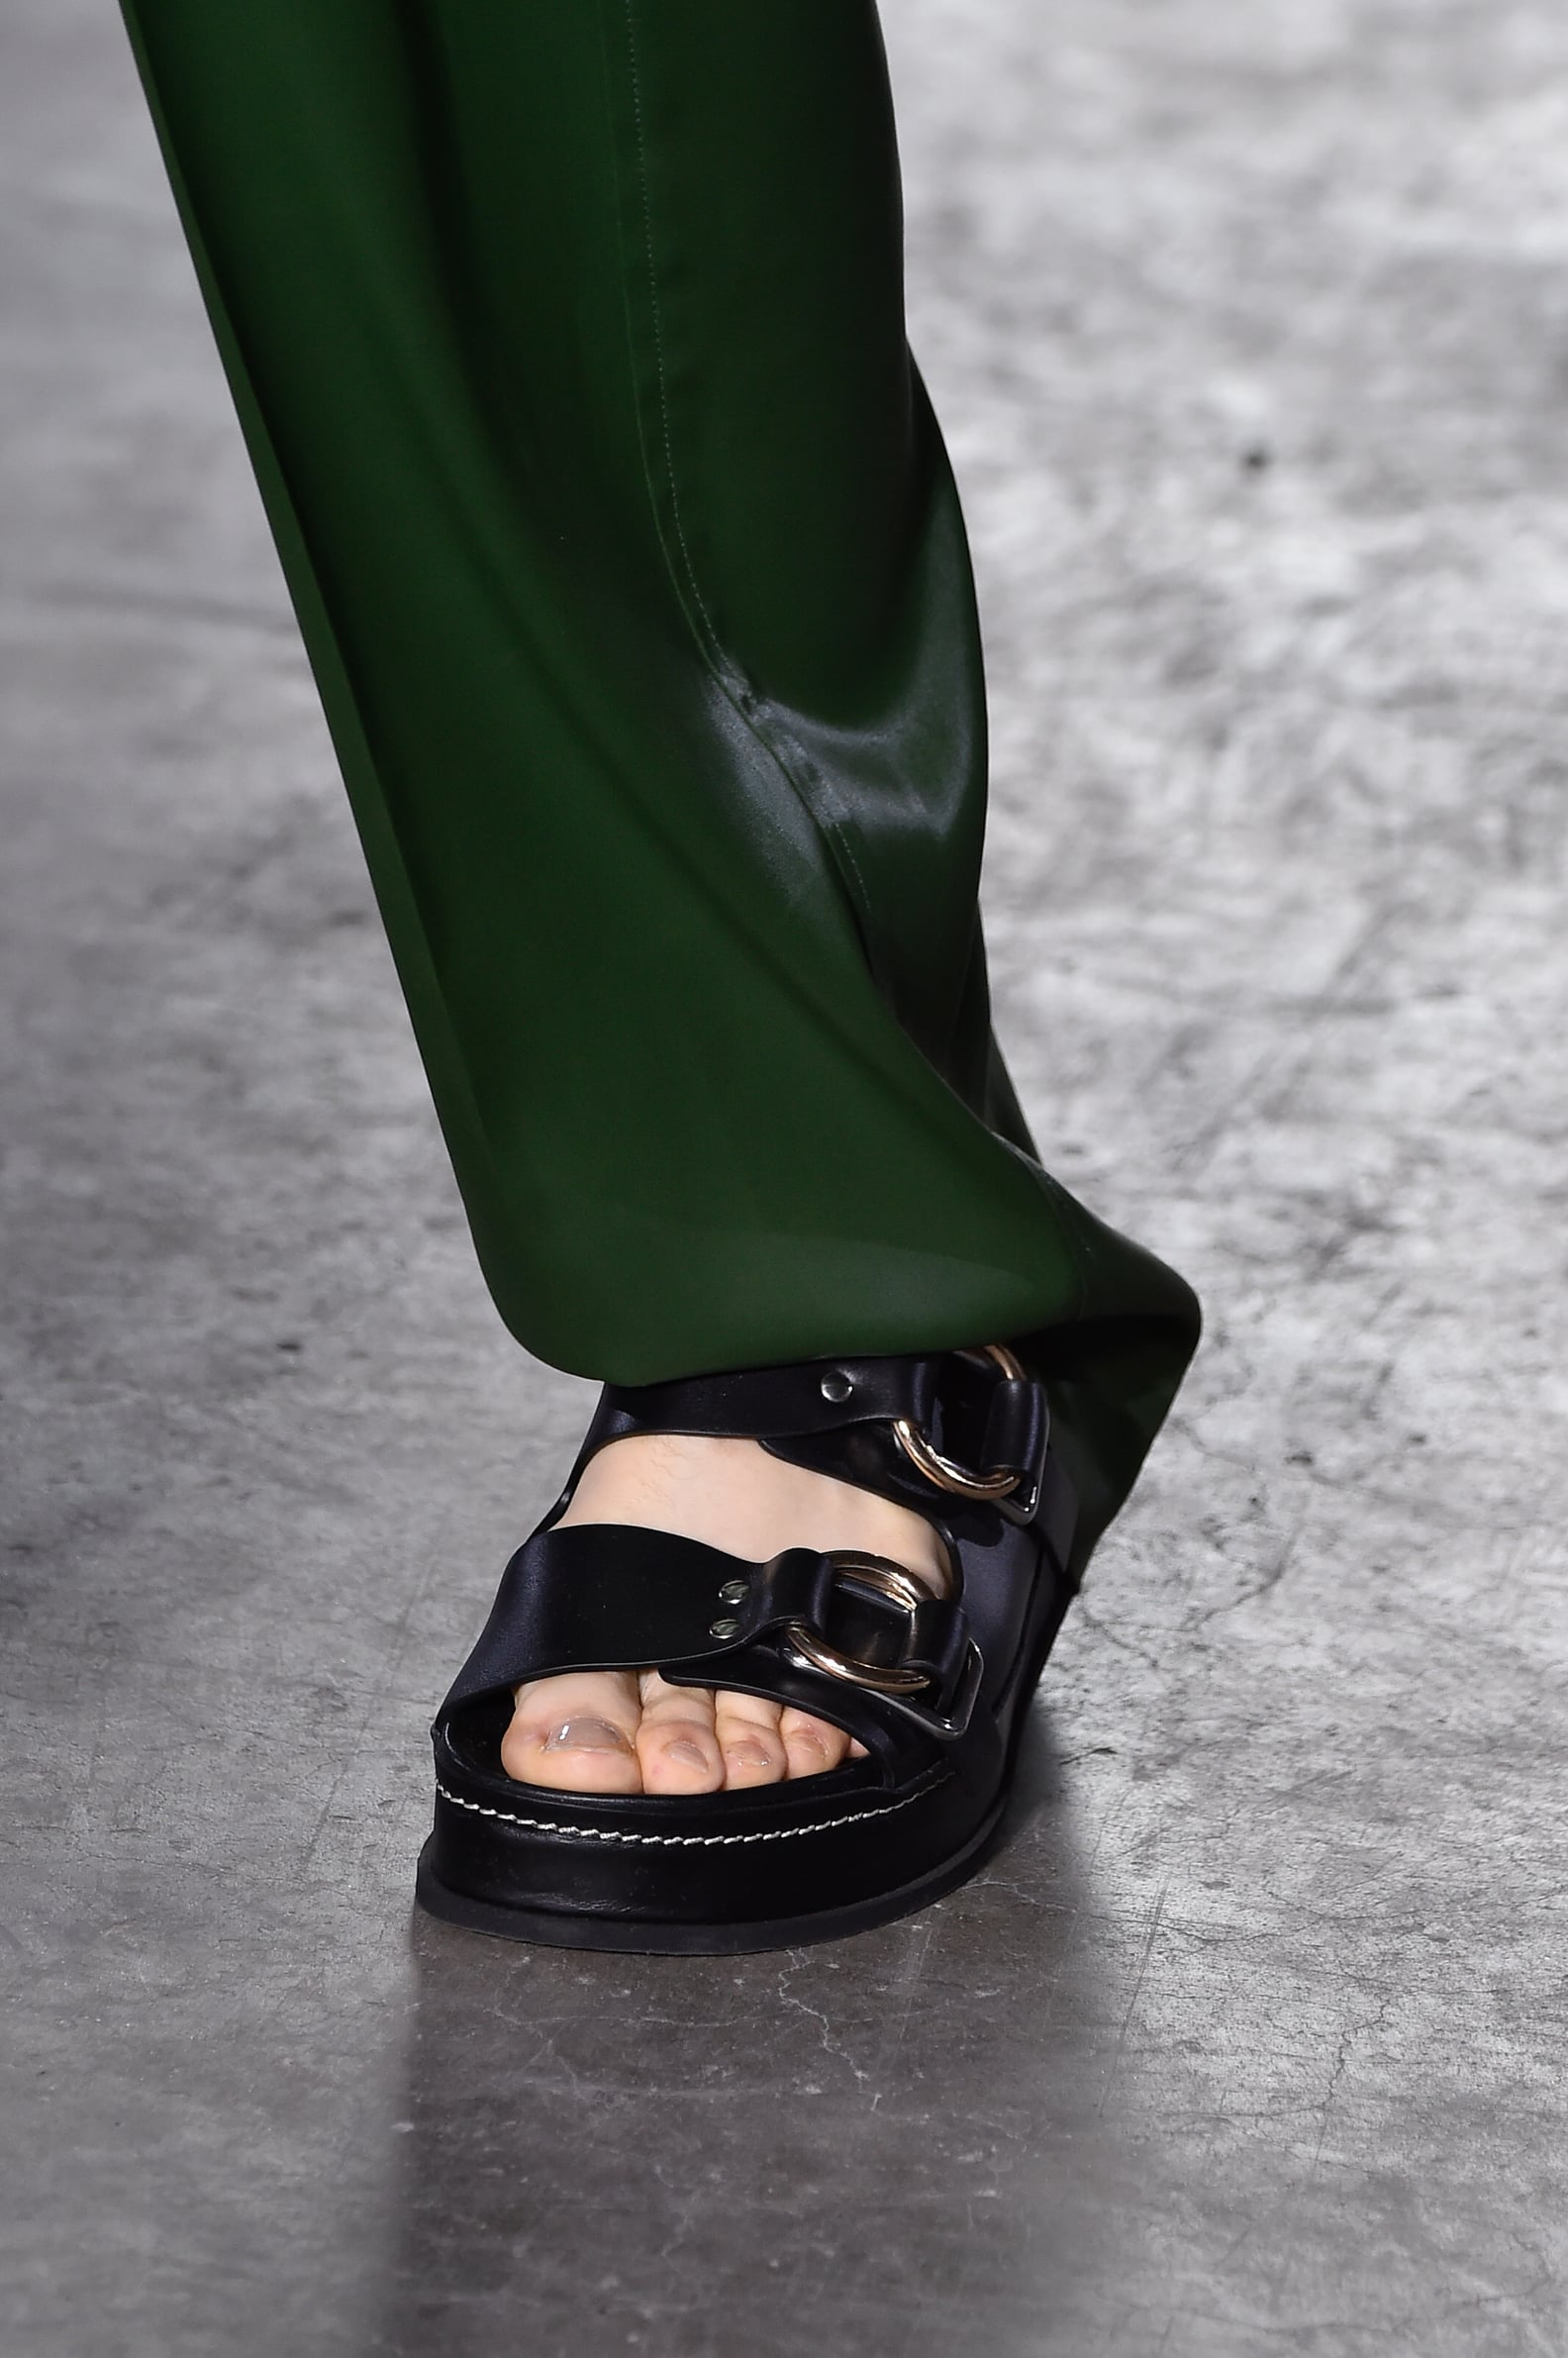 The Best Shoes From Fashion Week Spring 2020 | POPSUGAR Fashion